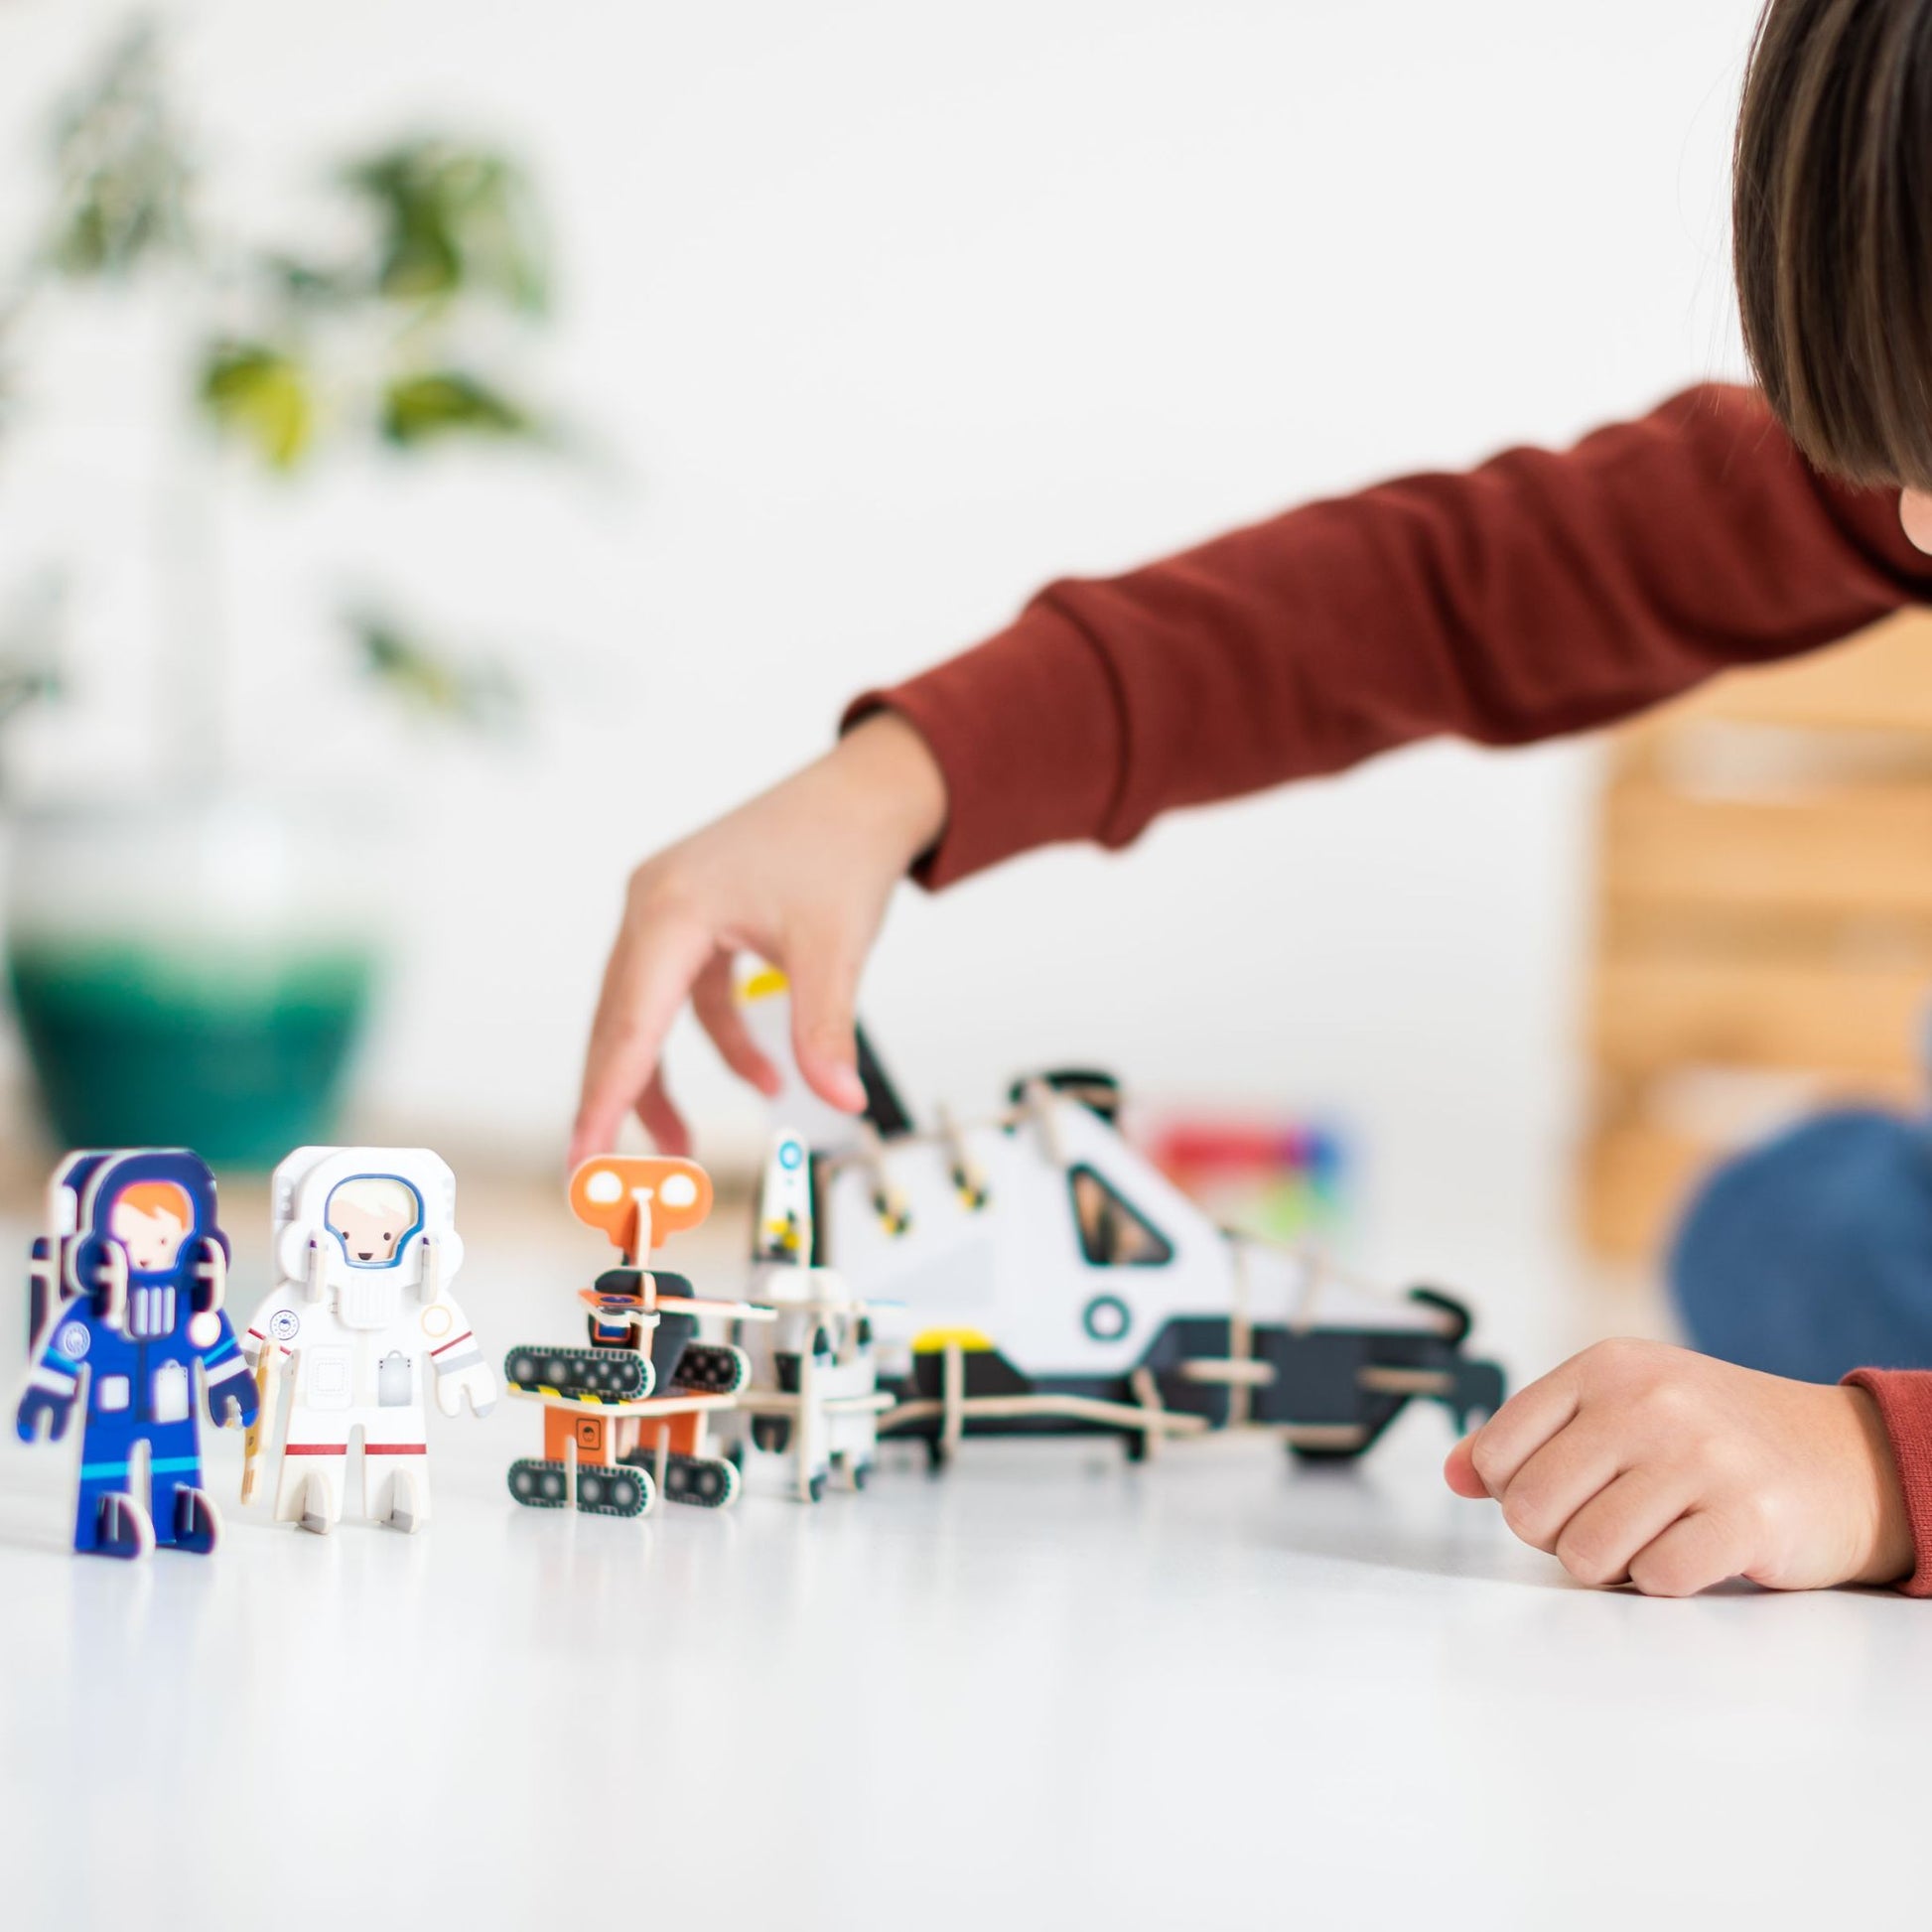 Build and play space toy - child playing - robots astronauts